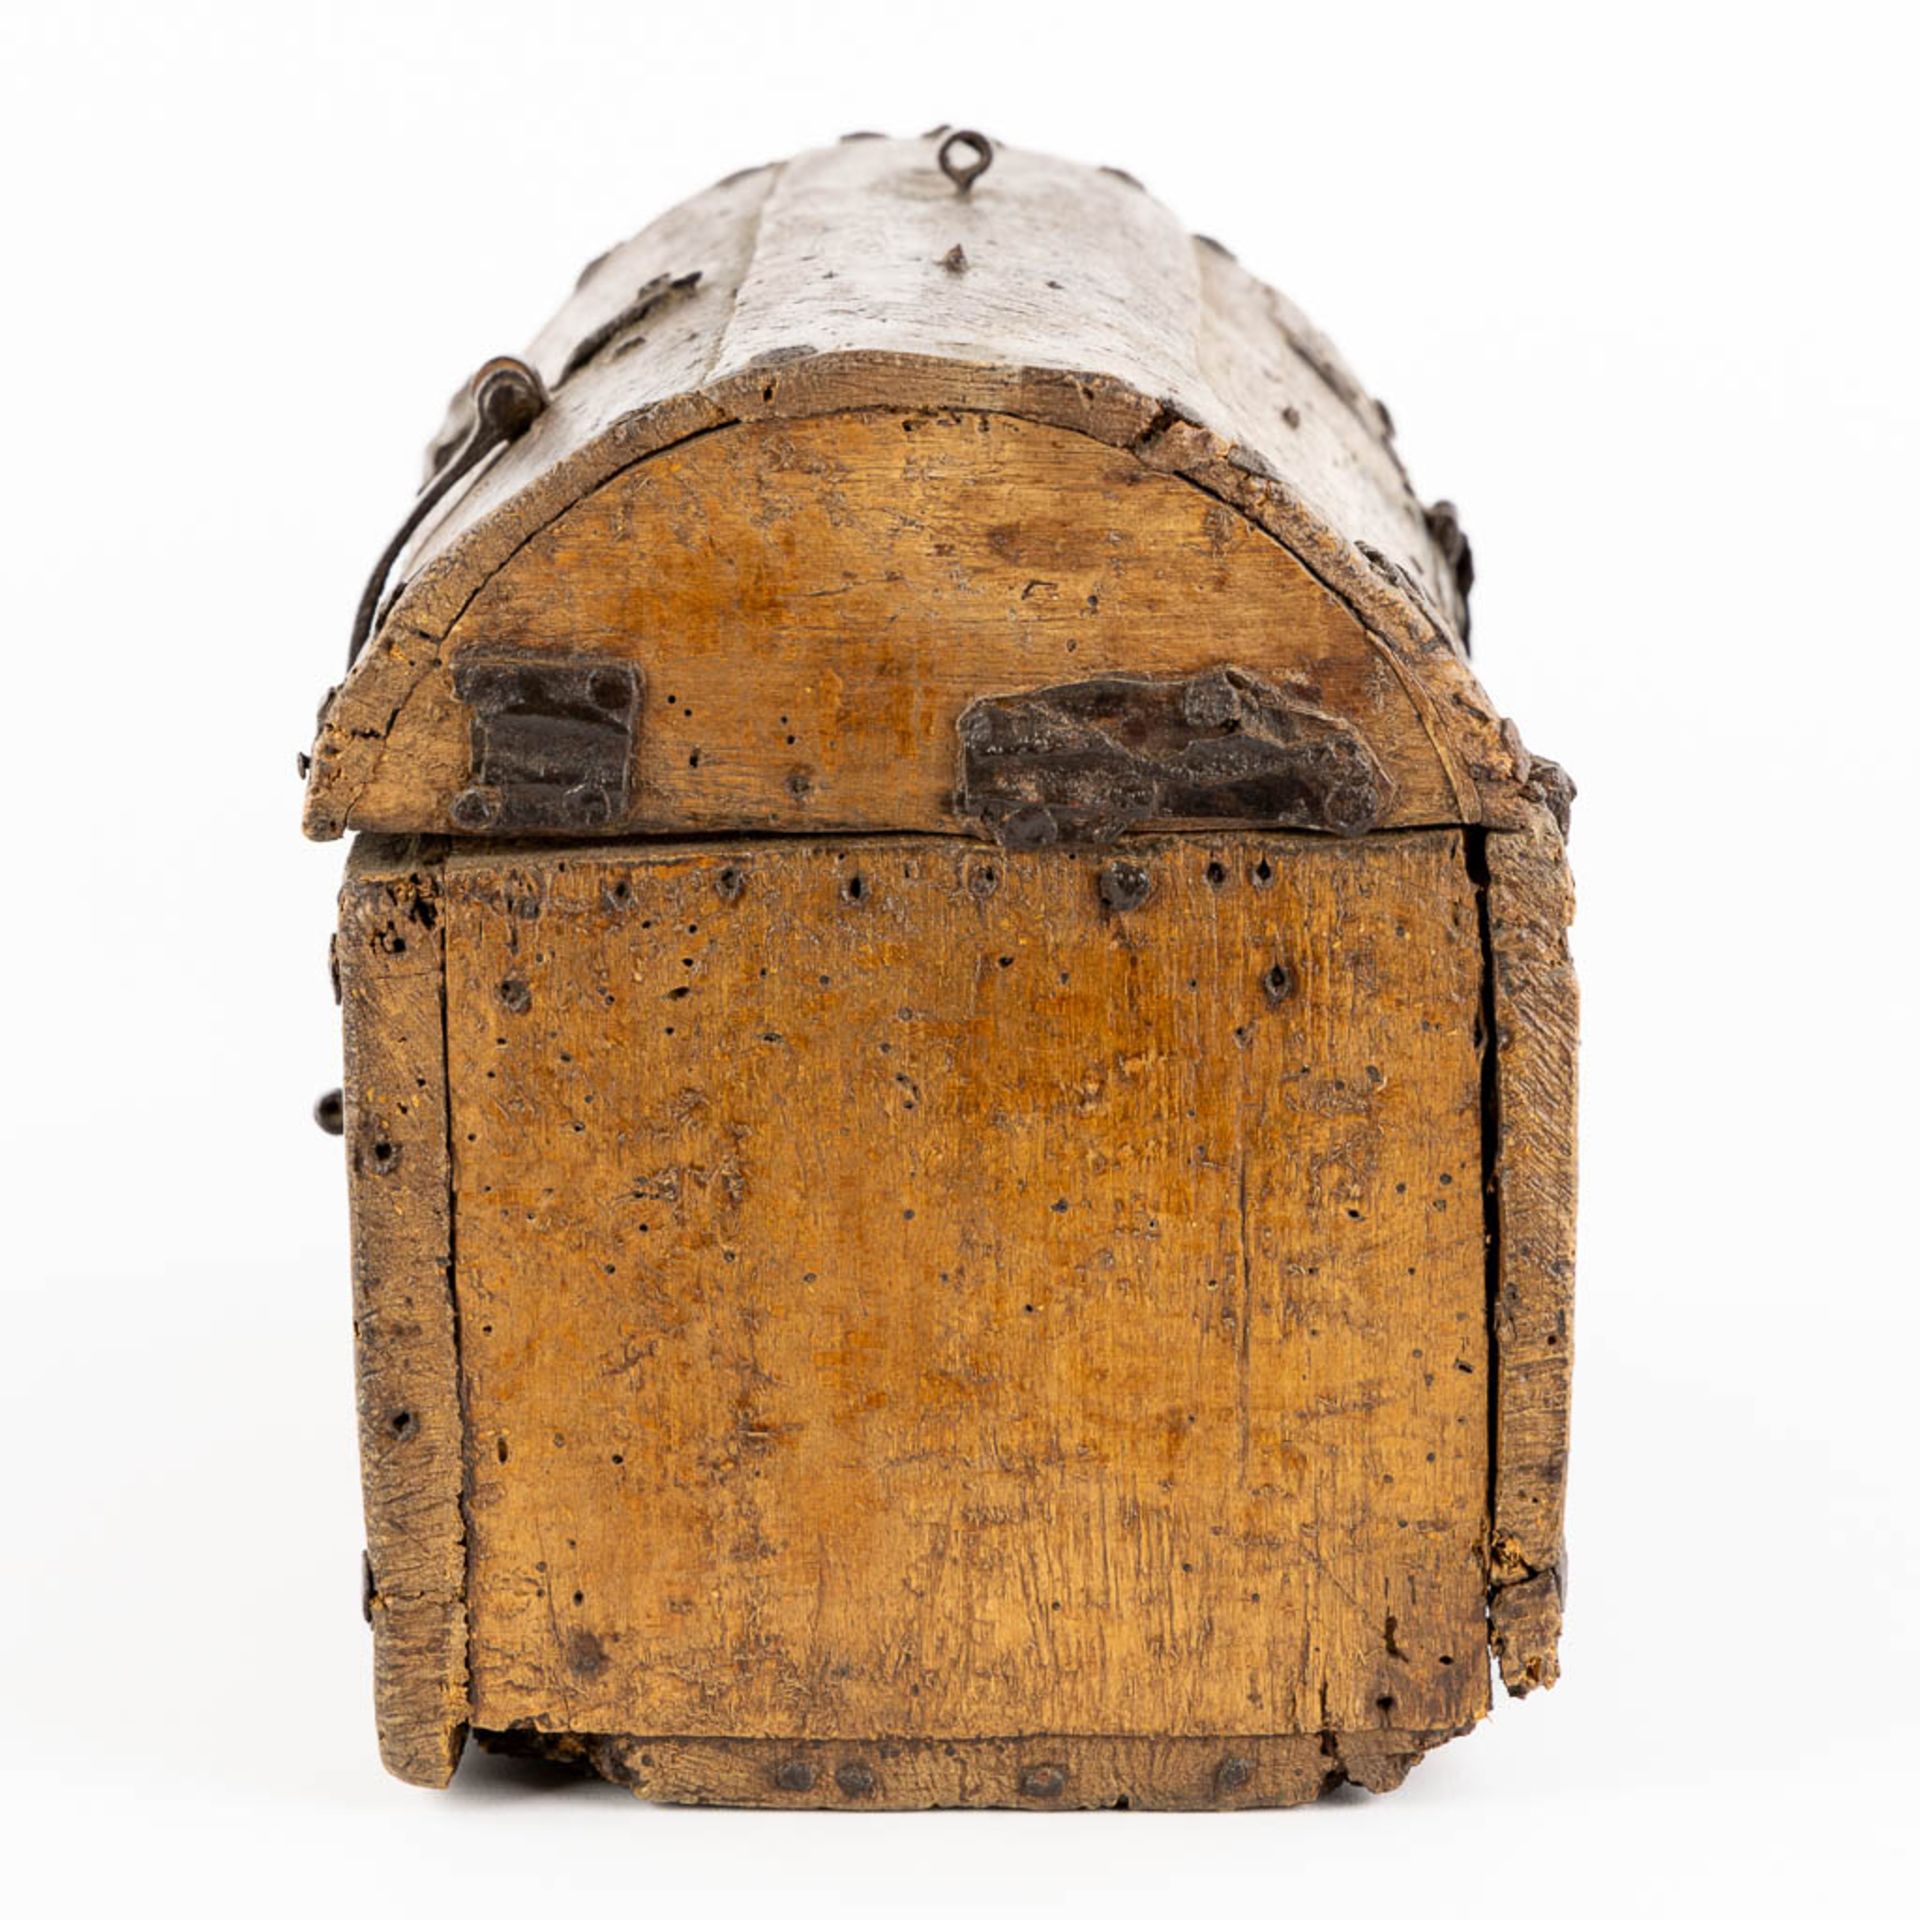 An antique money box or storage chest, wood and wrought iron, 16th/17th C. (L:20 x W:36 x H:22 cm) - Image 4 of 14